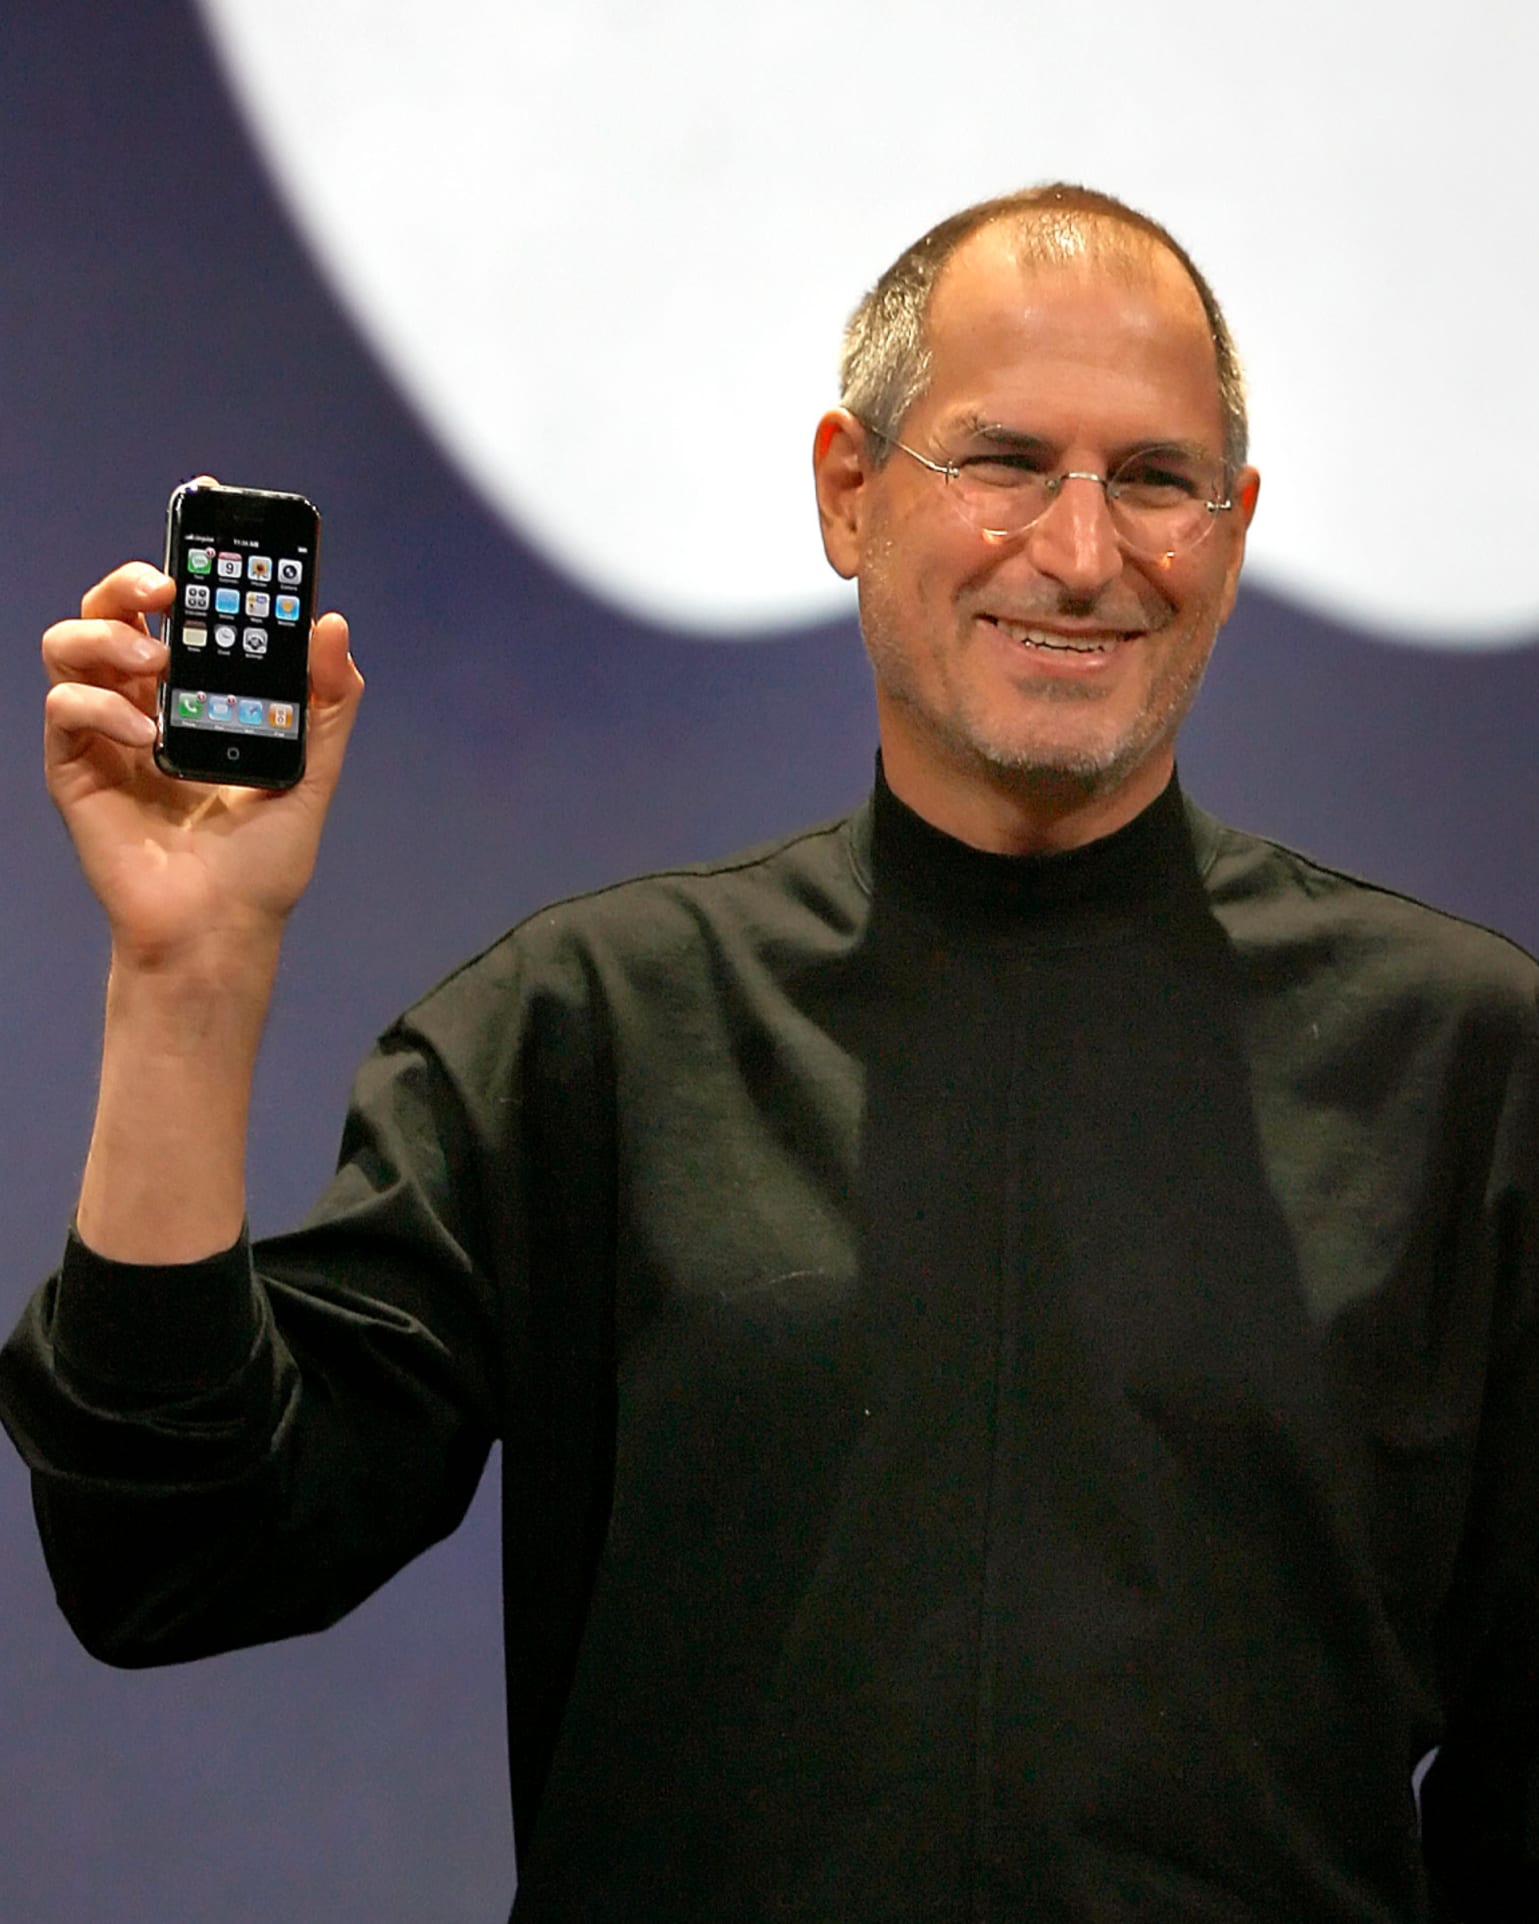 Steve in 2007, with short hair and gray in his beard, smiles and holds up an iPhone as he announces the device on stage.